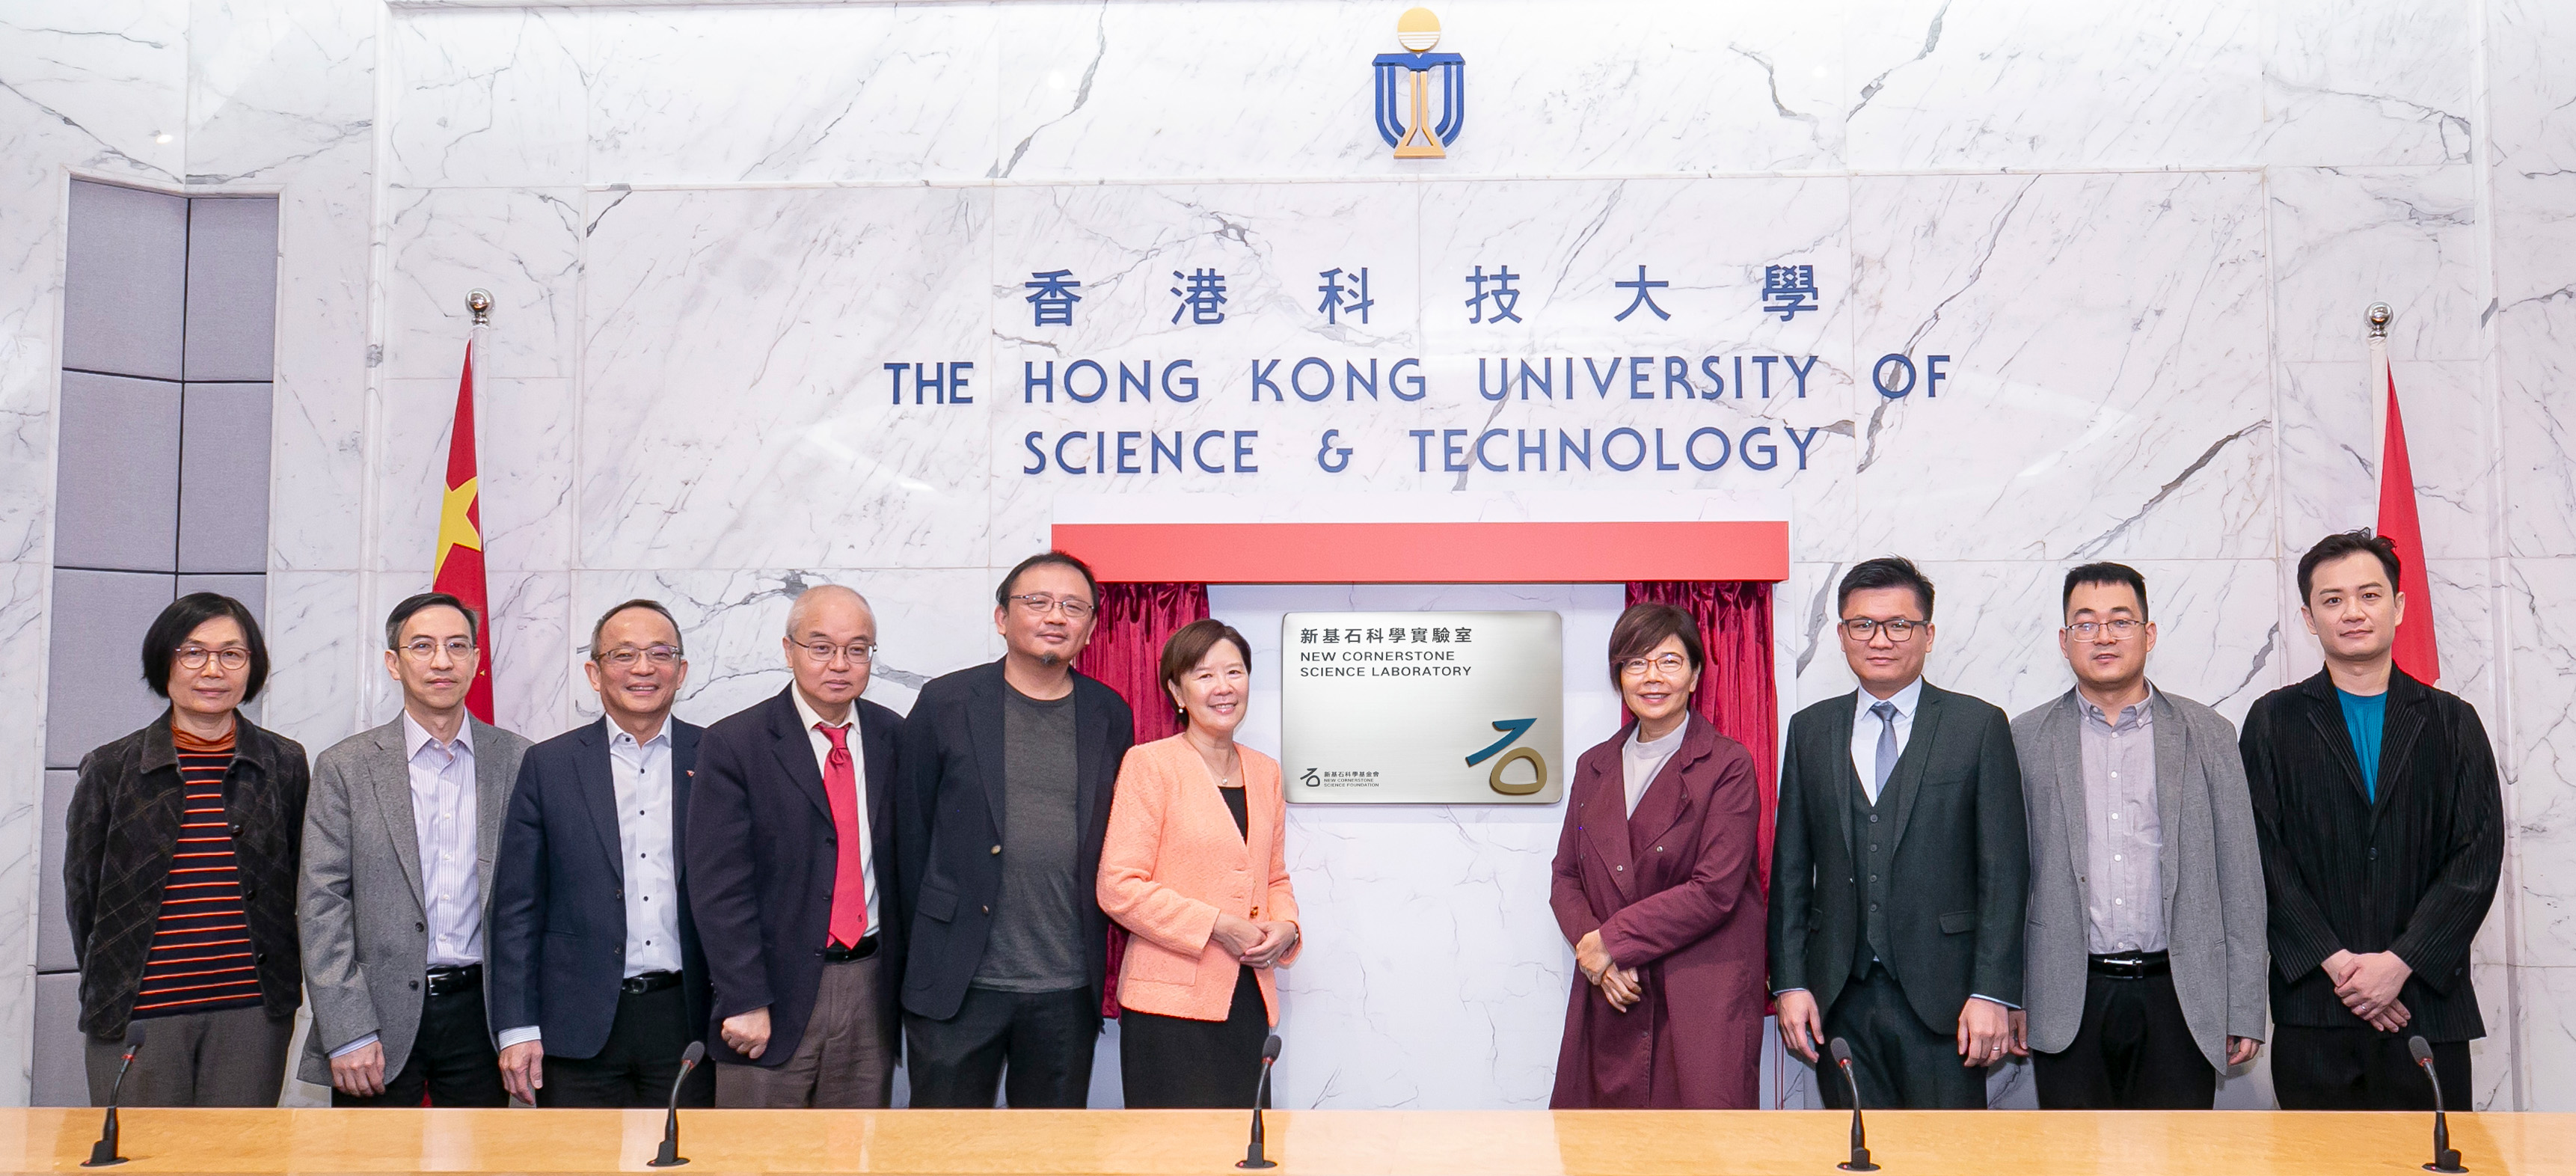 A group photo of HKUST President Prof. Nancy IP (sixth left), HKUST Vice-President for Institutional Advancement Prof. WANG Yang (fourth left), HKUST Vice-President for Research and Development Prof. Tim CHENG (third left), HKUST Dean of Science Prof. WONG Yung-Hou (second left), Head of HKUST’s Department of Physics Prof. WANG Jiannong (first left), Vice Chair and Secretary of the New Cornerstone Science Foundation Ms. Rose WANG (fourth right), Vice President of Public Affairs of Tencent Mr. James LI Tsz-Shu (third right), HKUST’s New Cornerstone Investigator Prof. DAI Xi (fifth left) and other representatives from the New Cornerstone Science Foundation.